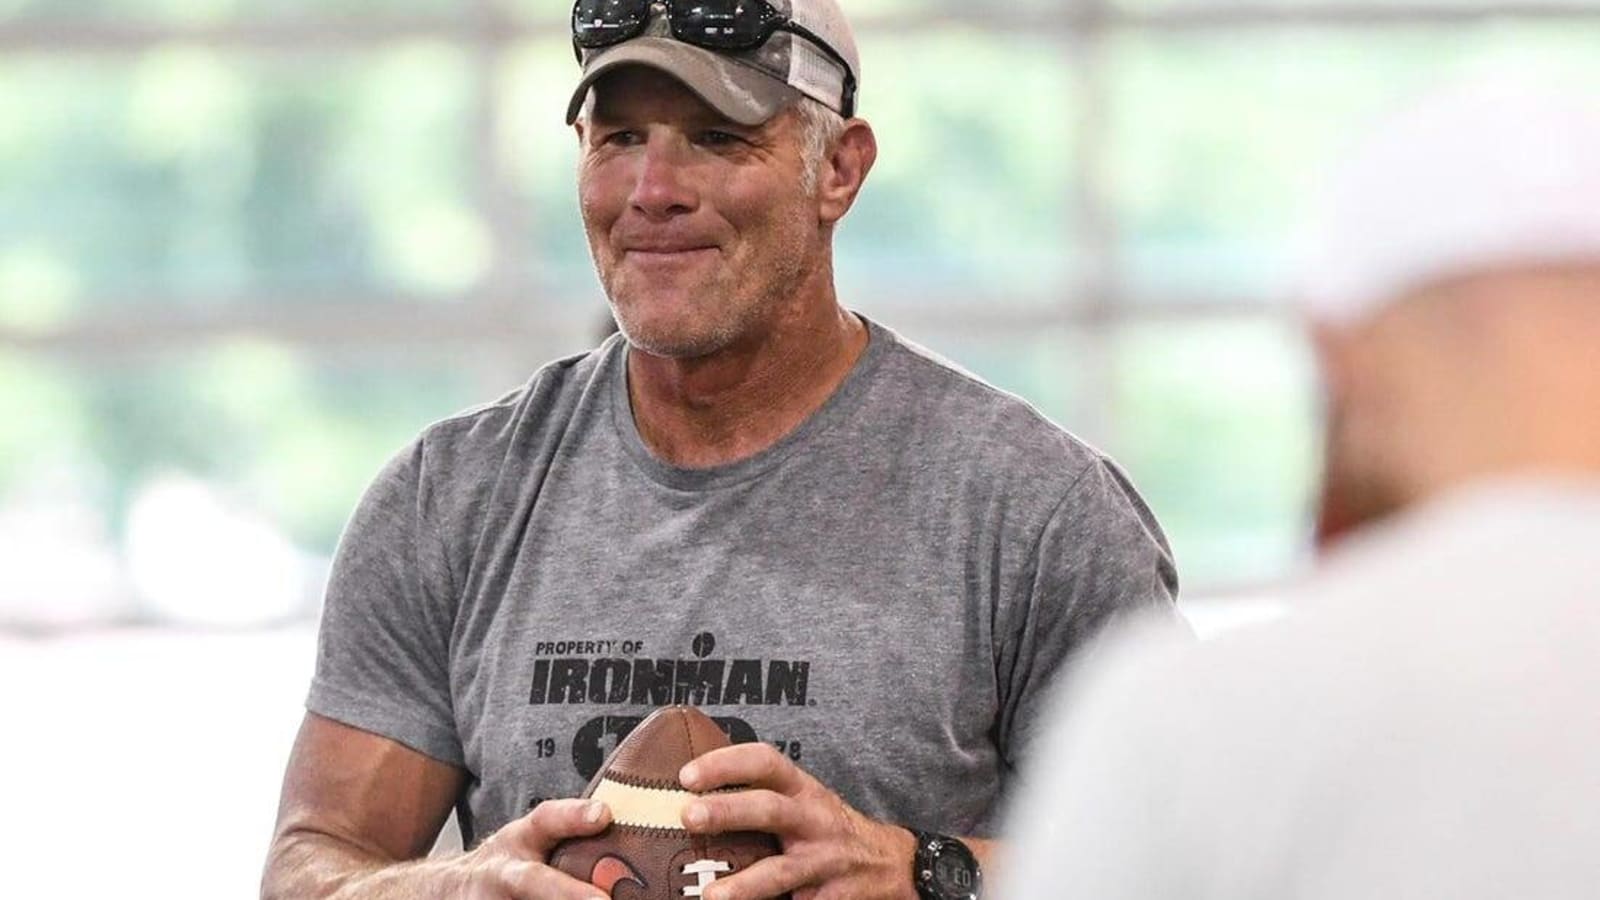 Brett Favre: ‘I did not know’ Miss. funds were earmarked for welfare